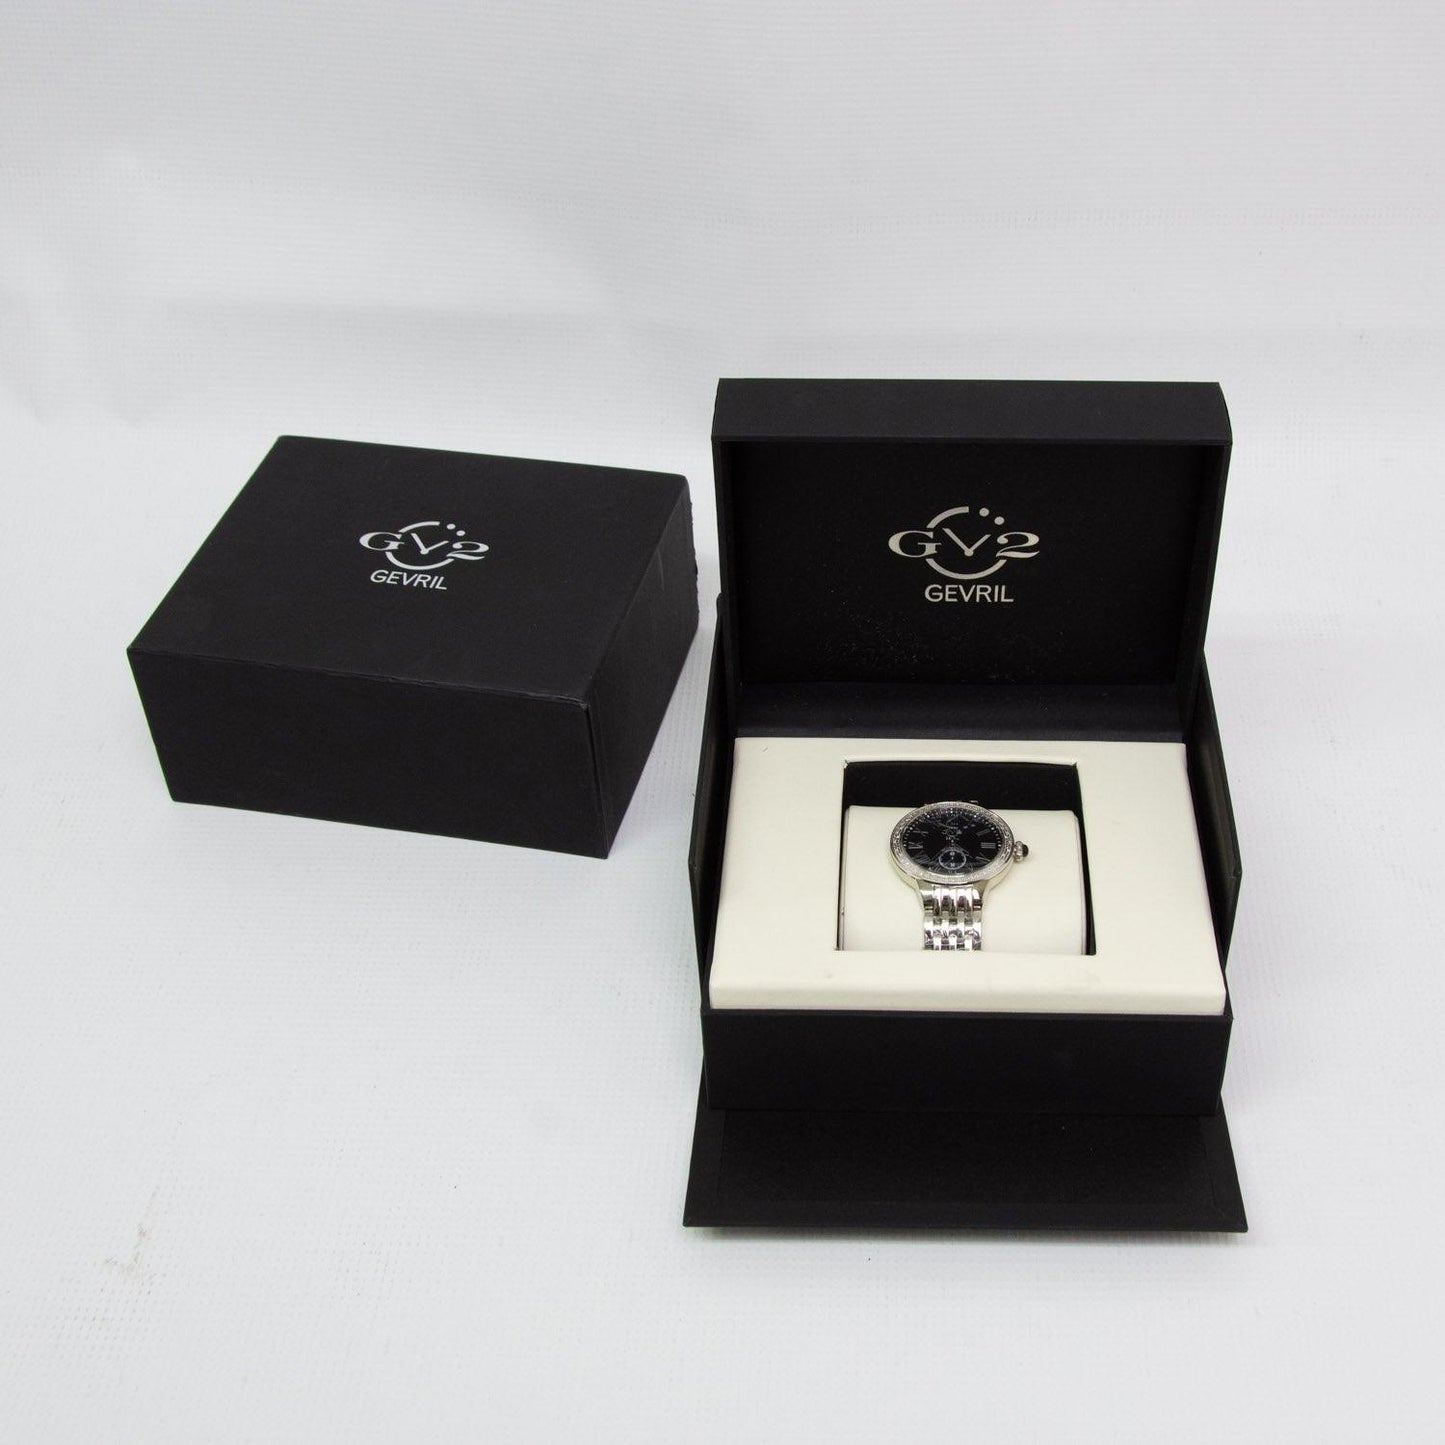 Gevril Astor Limited Edition Stainless Steel Watch & Original Box - ipawnishop.com